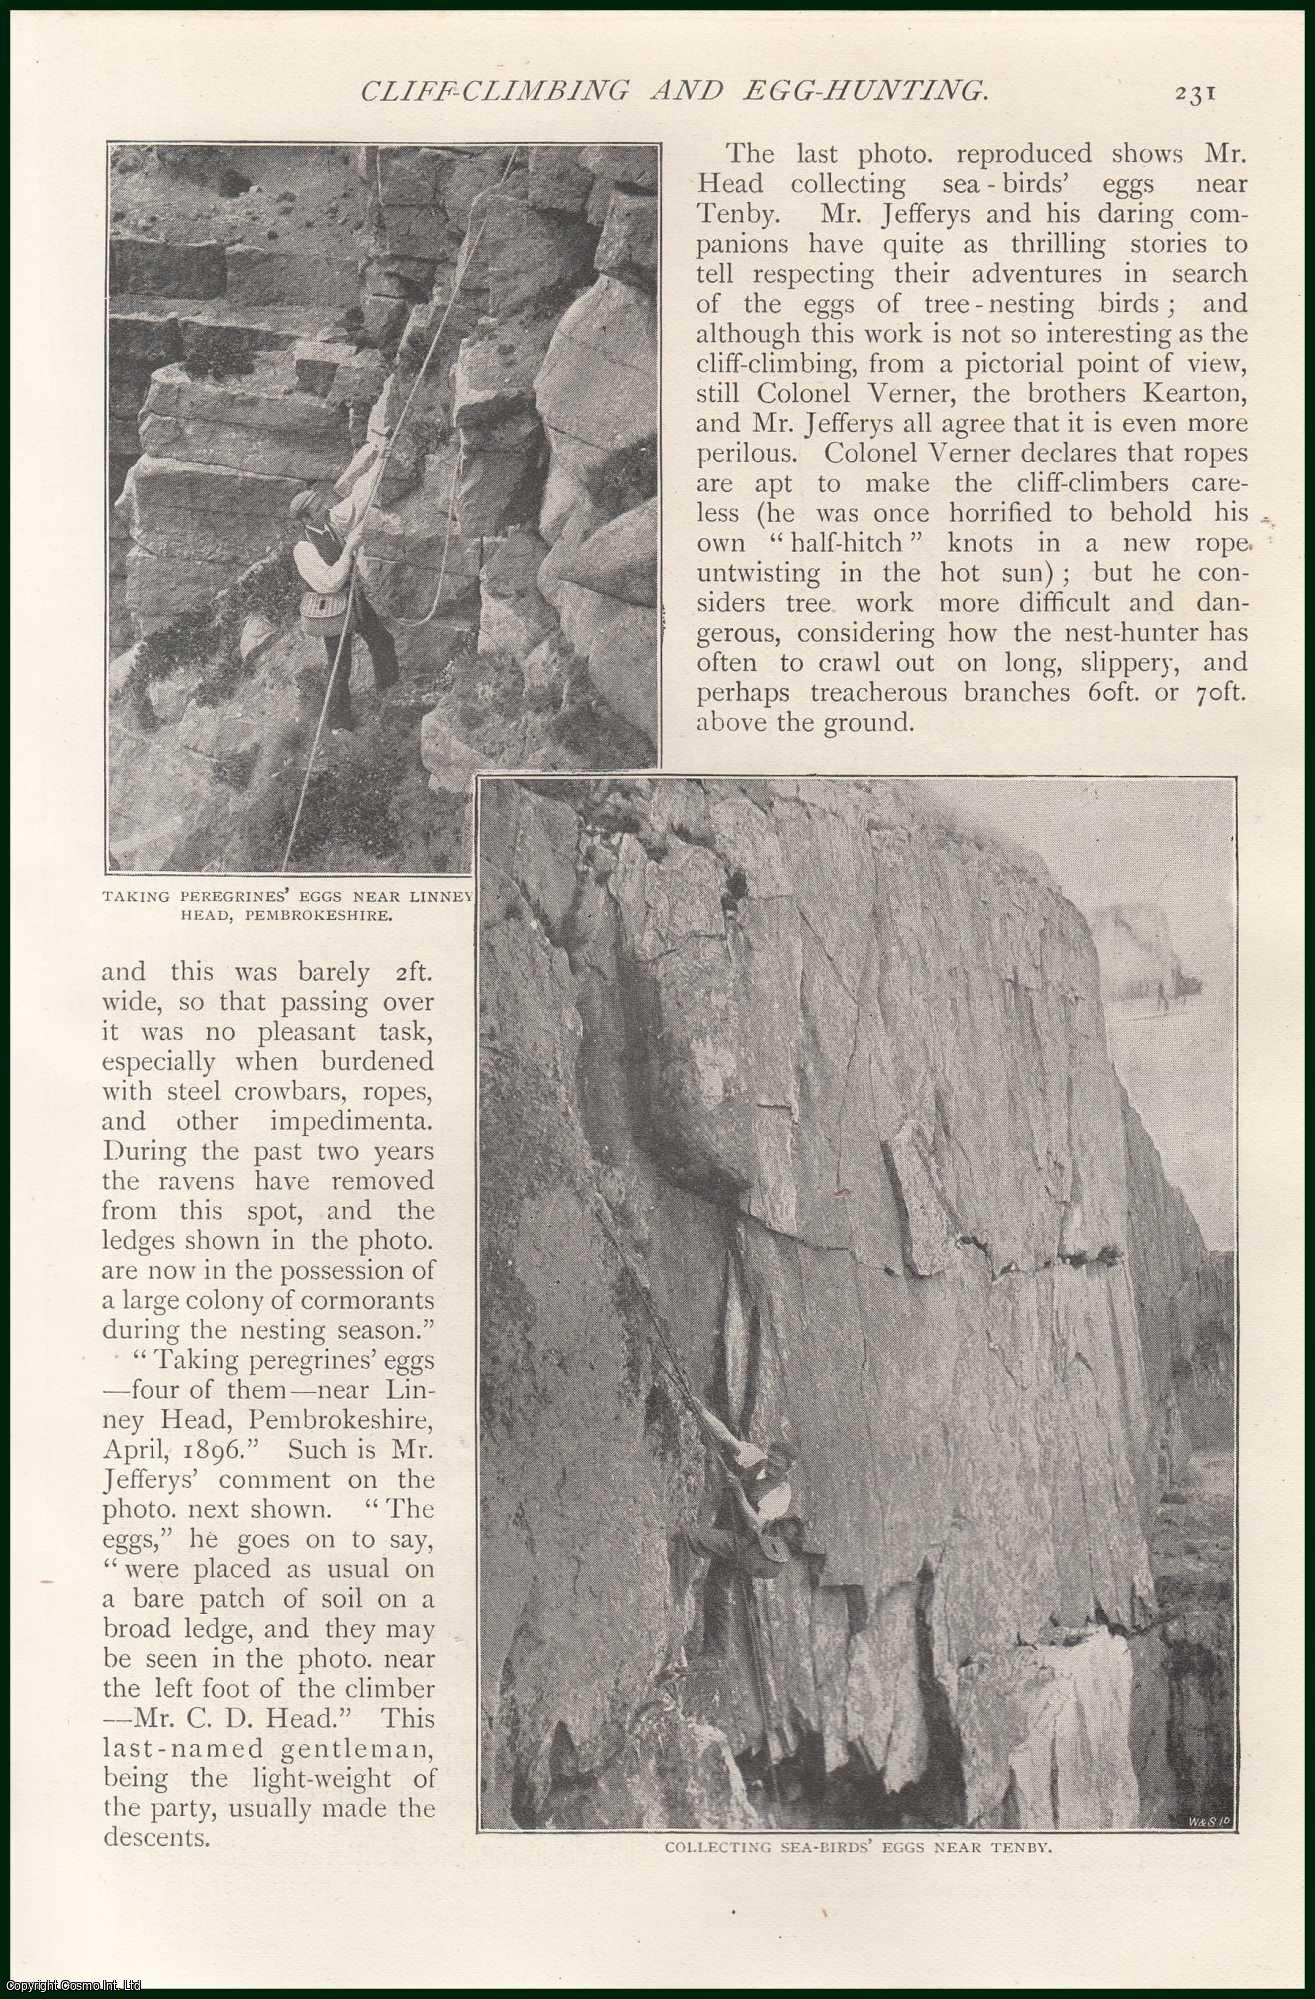 L.S. Lewis - Pembrokeshire ; Tenby ; Carmarthenshire & more : Cliff-Climbing and Egg-Hunting. An uncommon original article from The Strand Magazine, 1897.